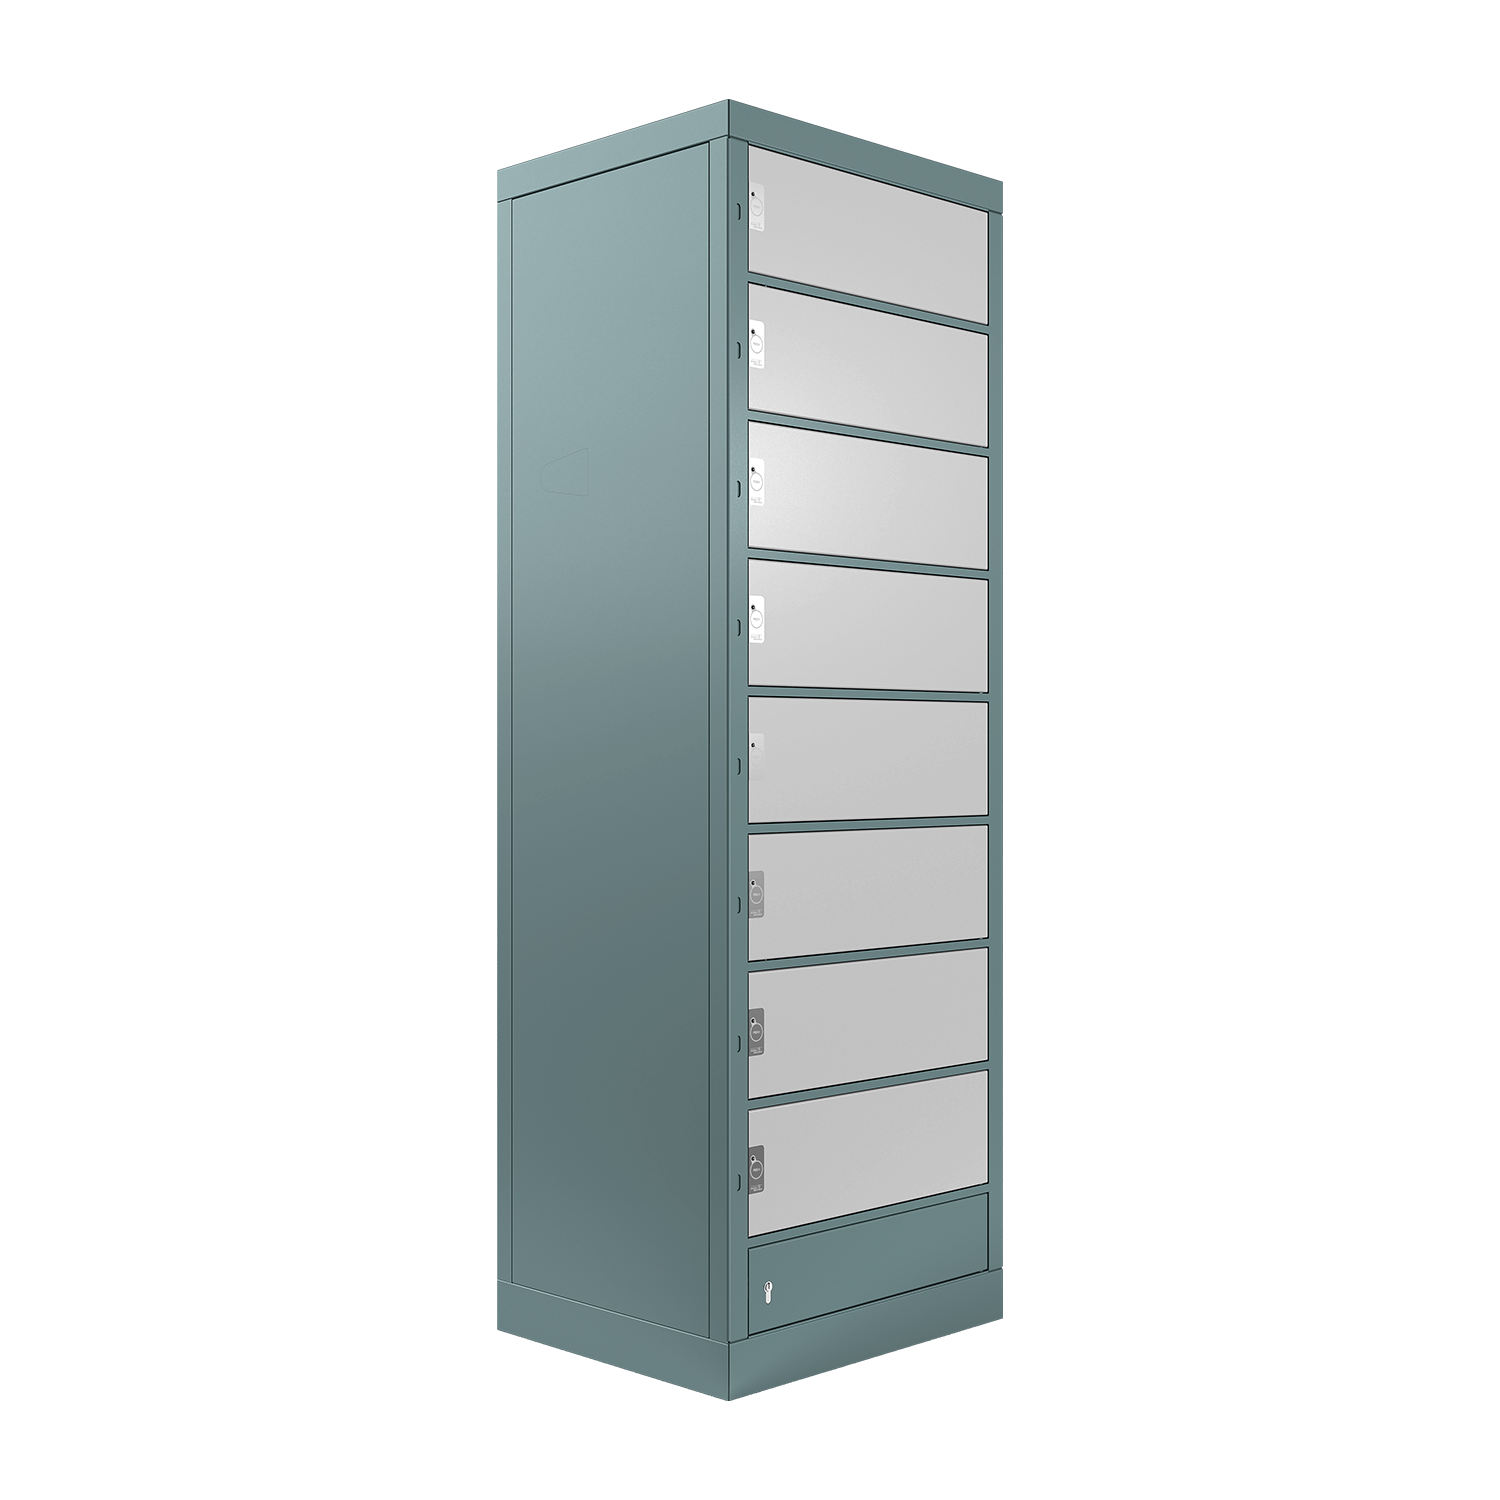 Locker system, L size, with 8 compartments for safekeeping